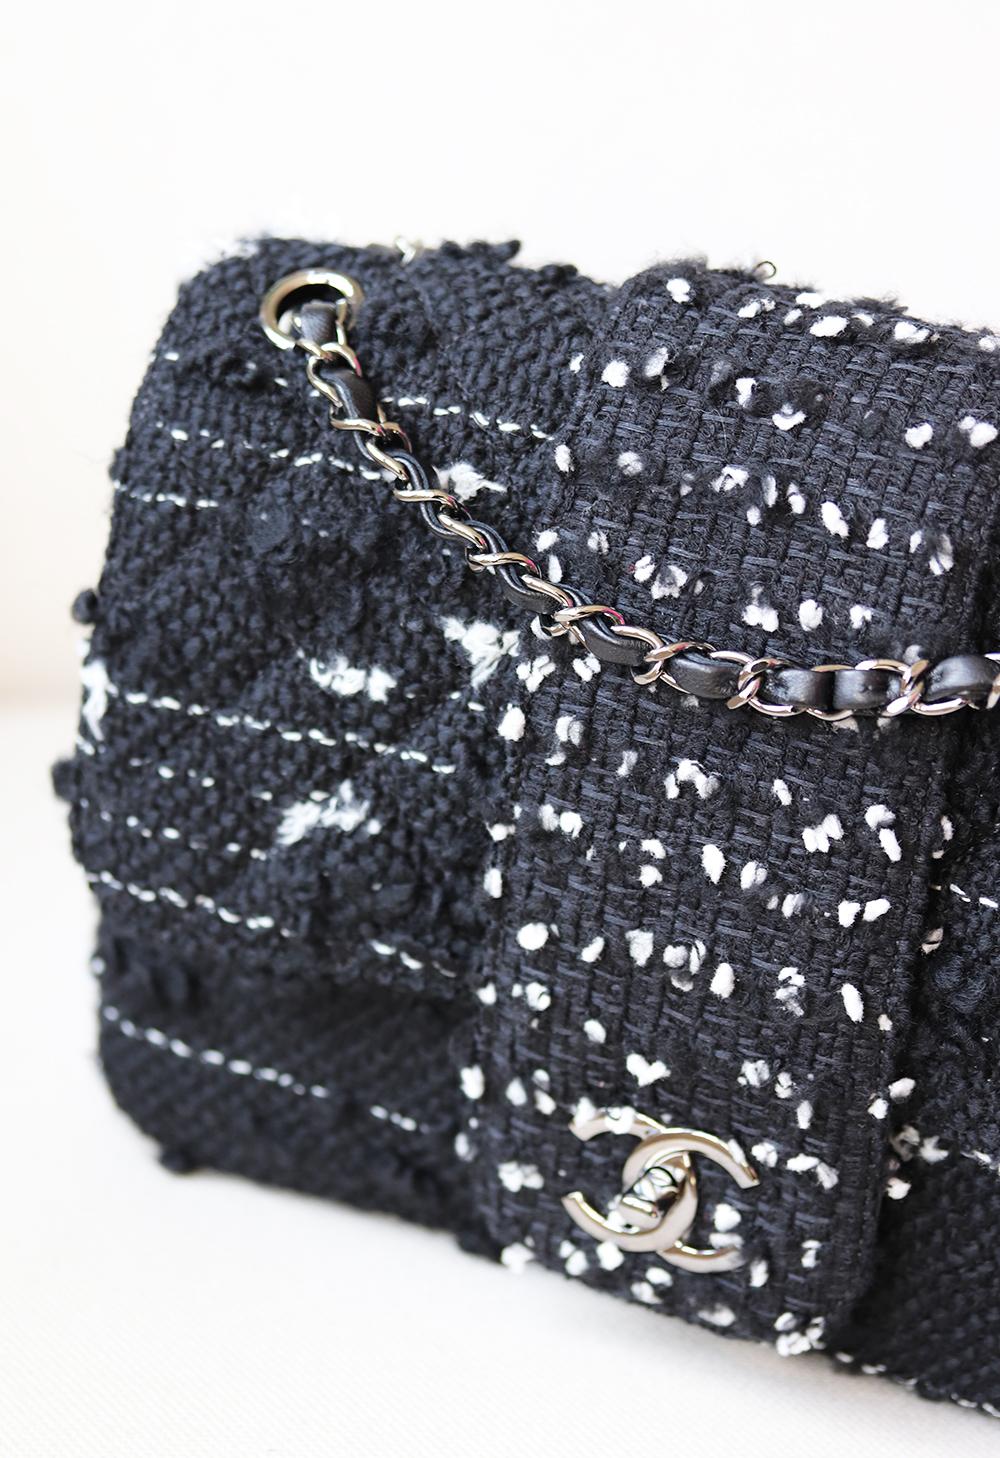 Chanel Tweed Elementary Chic Flap Bag has been hand-finished by skilled artisans in the label's workshop.
Boasting a quited textured-tweed exterior, this design is accented with silver-toned and black lambskin-leather chain strap.
Made in France